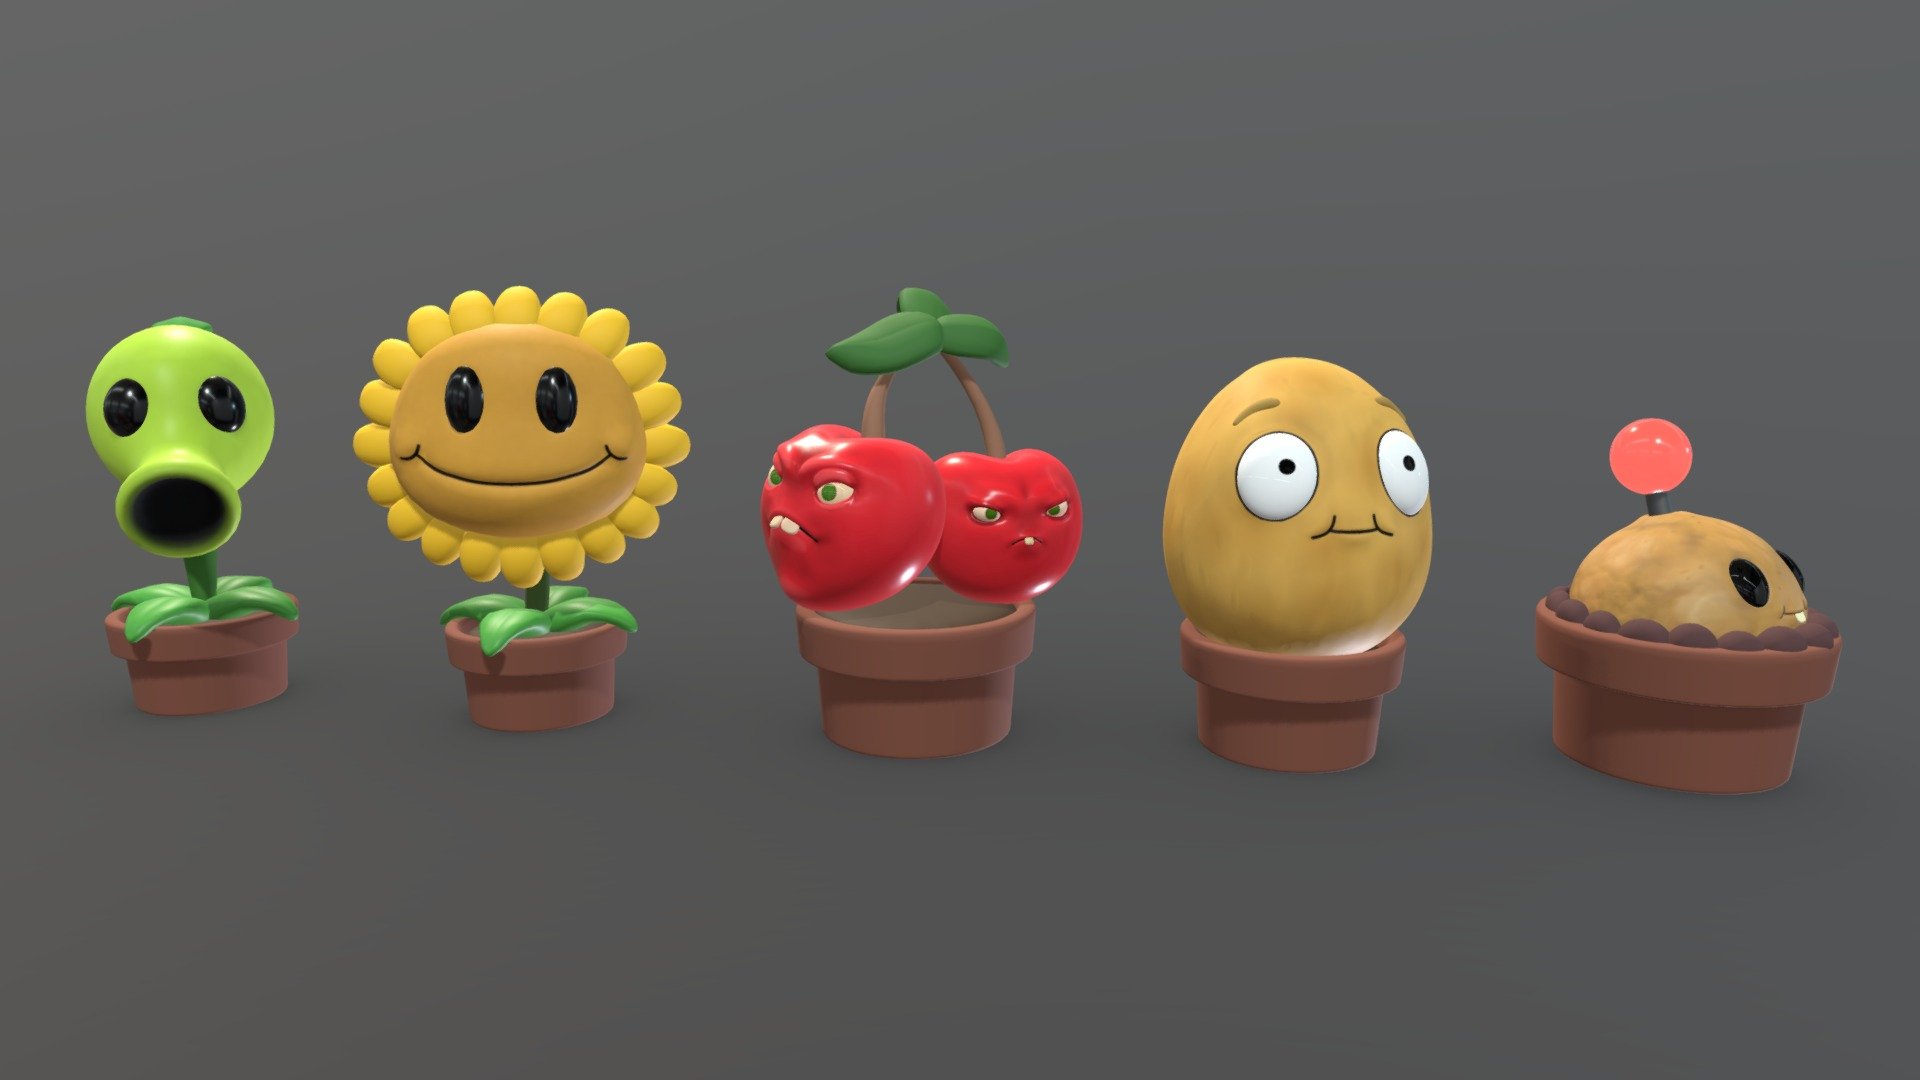 The zombies are coming, choose your plants.

Characters: Peashooter, Sunflower, Cherry Bomb, Wall-nut and Potato Mine.
Videogames: Plants vs Zombies

Program: Zbrush
Retopology: Autodesk Maya
Render: Blender (Cycles)
Textures: Substance Painter - Plants vs Zombies (1) - Buy Royalty Free 3D model by Loslolos 3d model